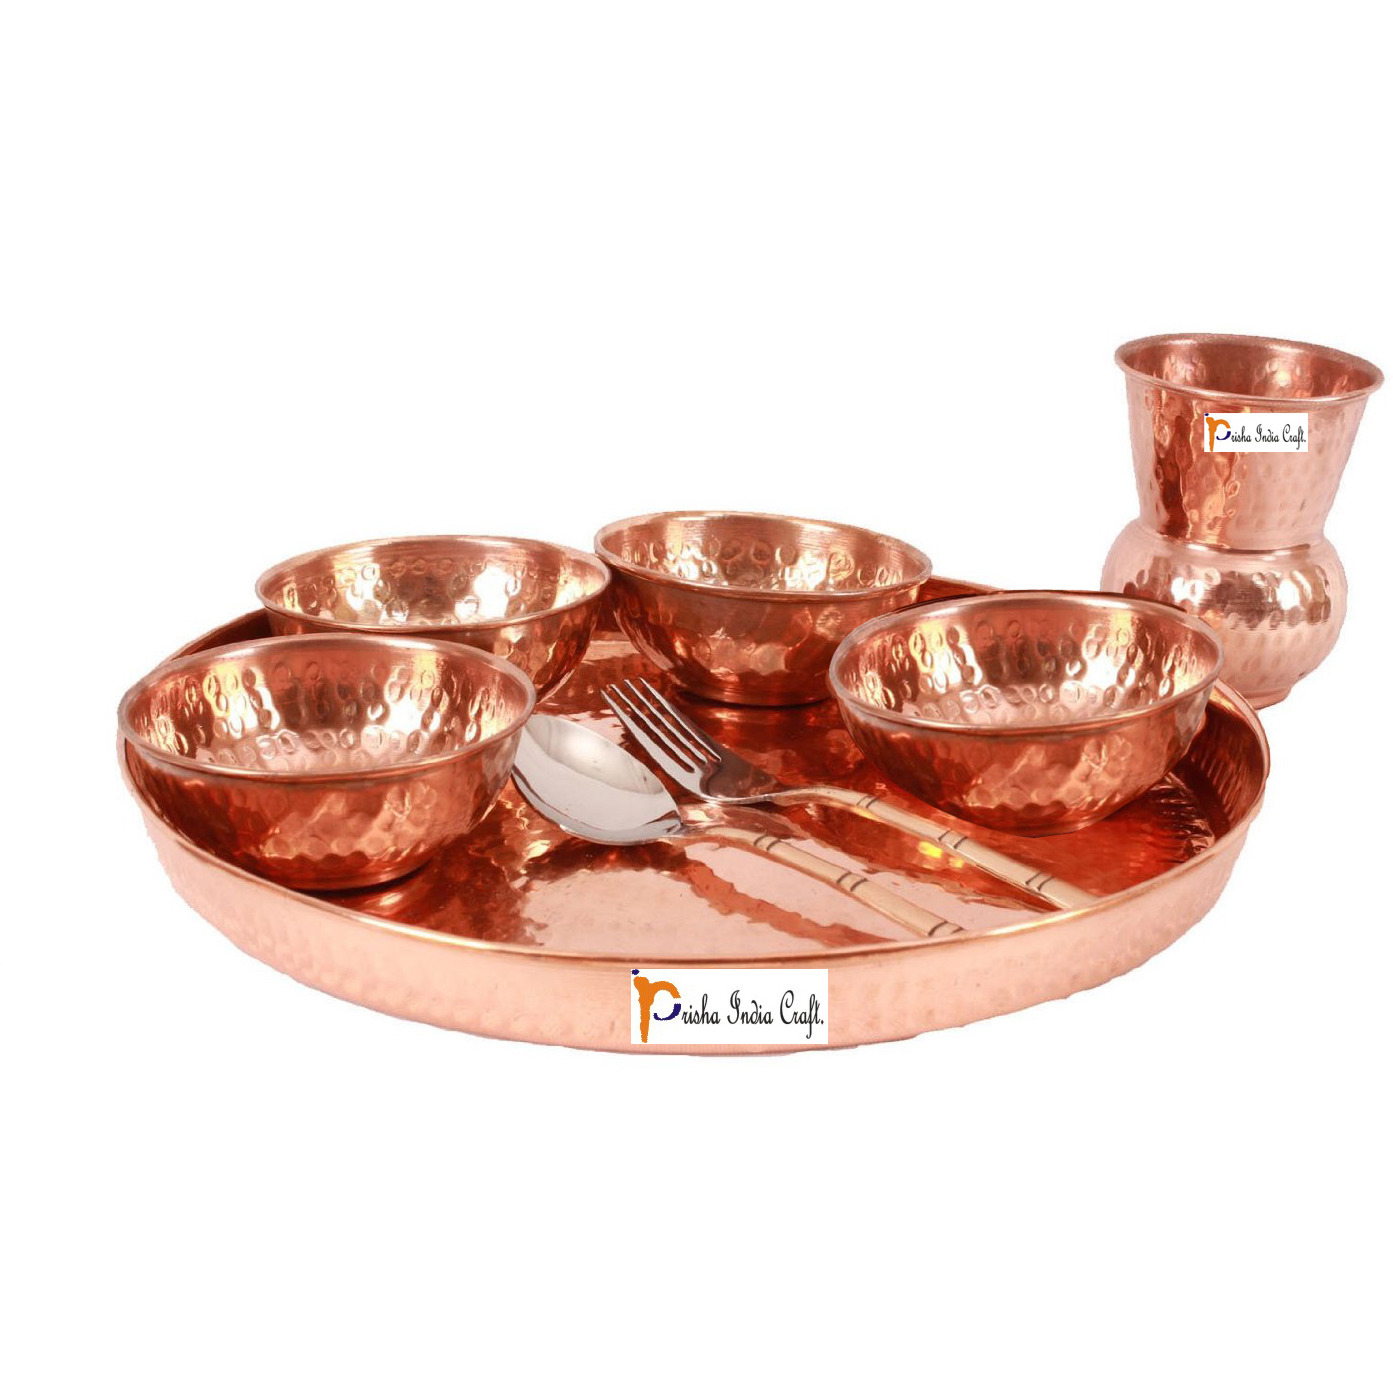 Prisha India Craft B. Set of 3 Dinnerware Traditional 100% Pure Copper Dinner Set of Thali Plate, Bowls, Glass and Spoon, Dia 12  With 1 Stainless Steel Copper Pitcher Jug - Christmas Gift